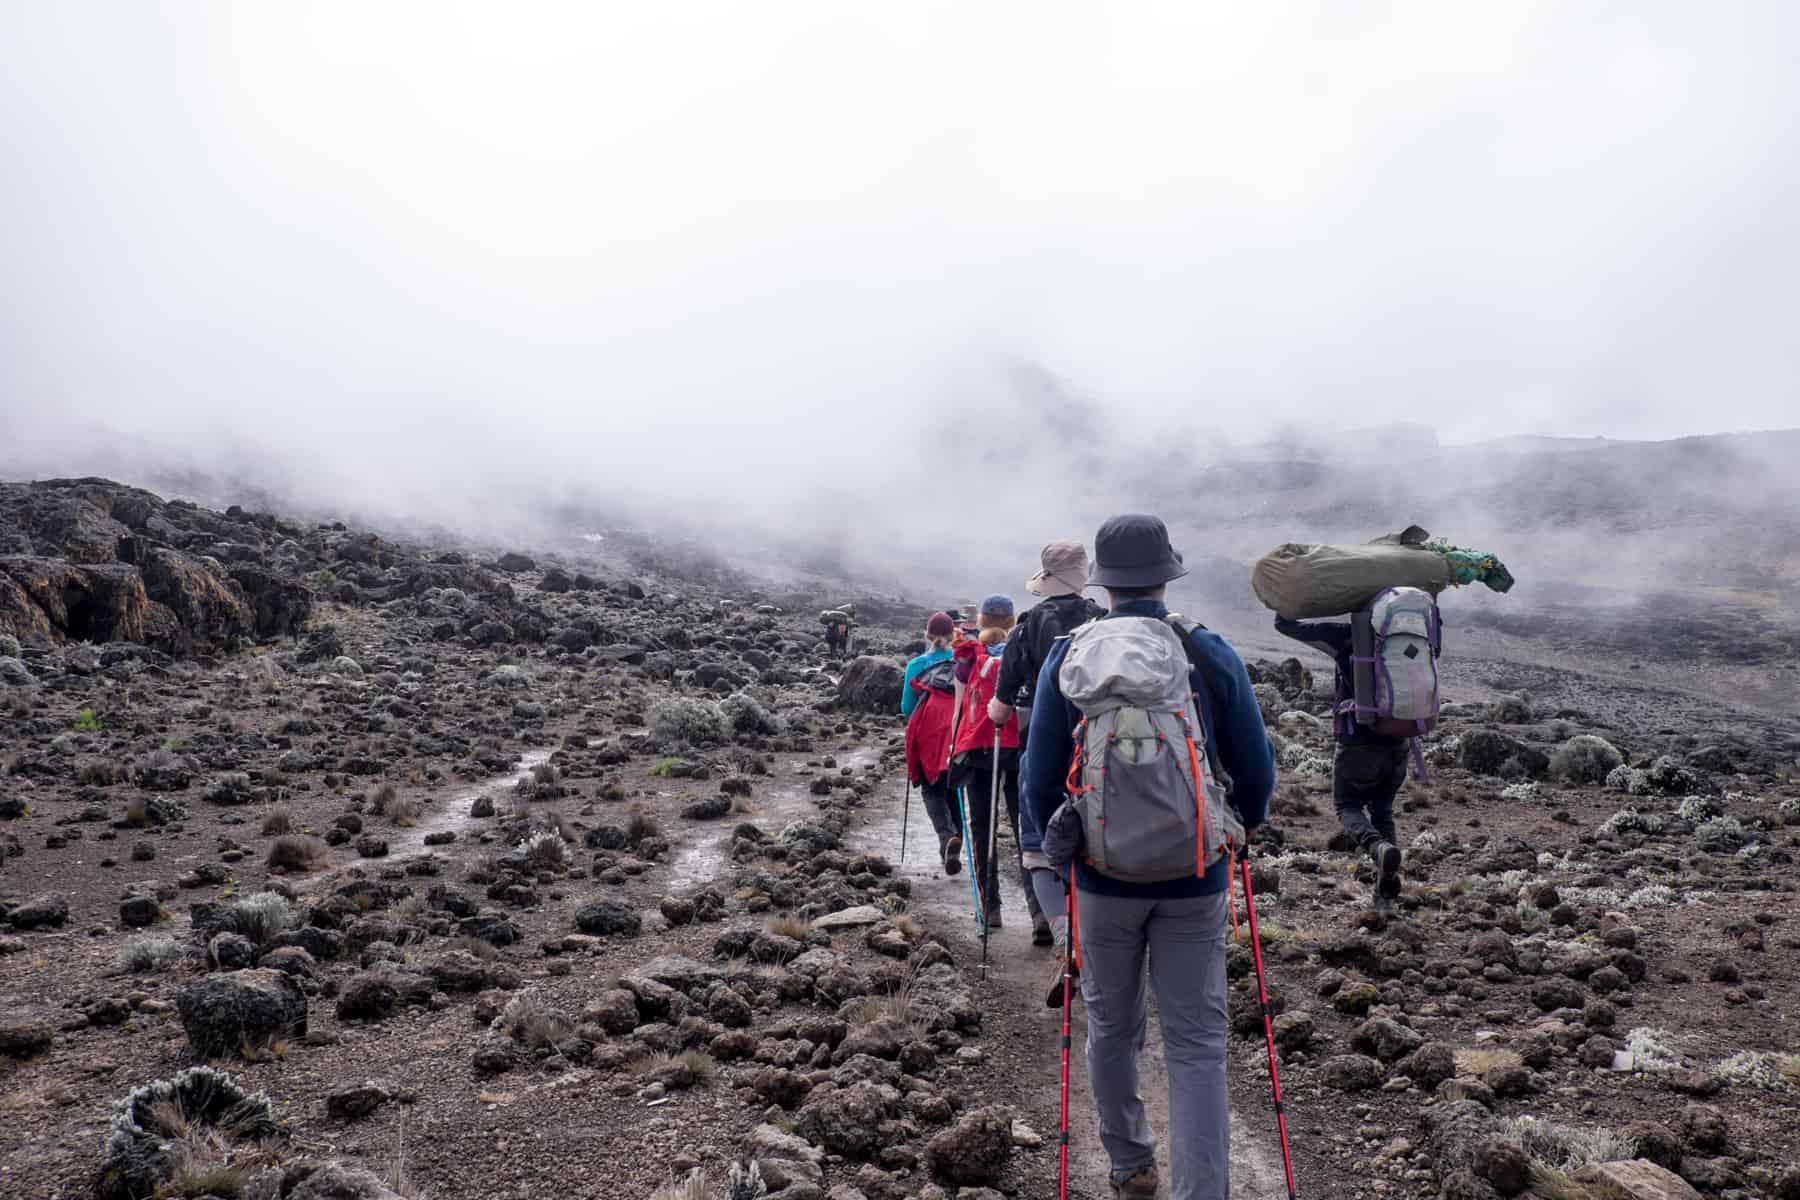 A porter on the right carrying a large, long bag, passes a group of trekkers to the right on a rocky, volcanic landscape of Mt. Kilimanjaro.